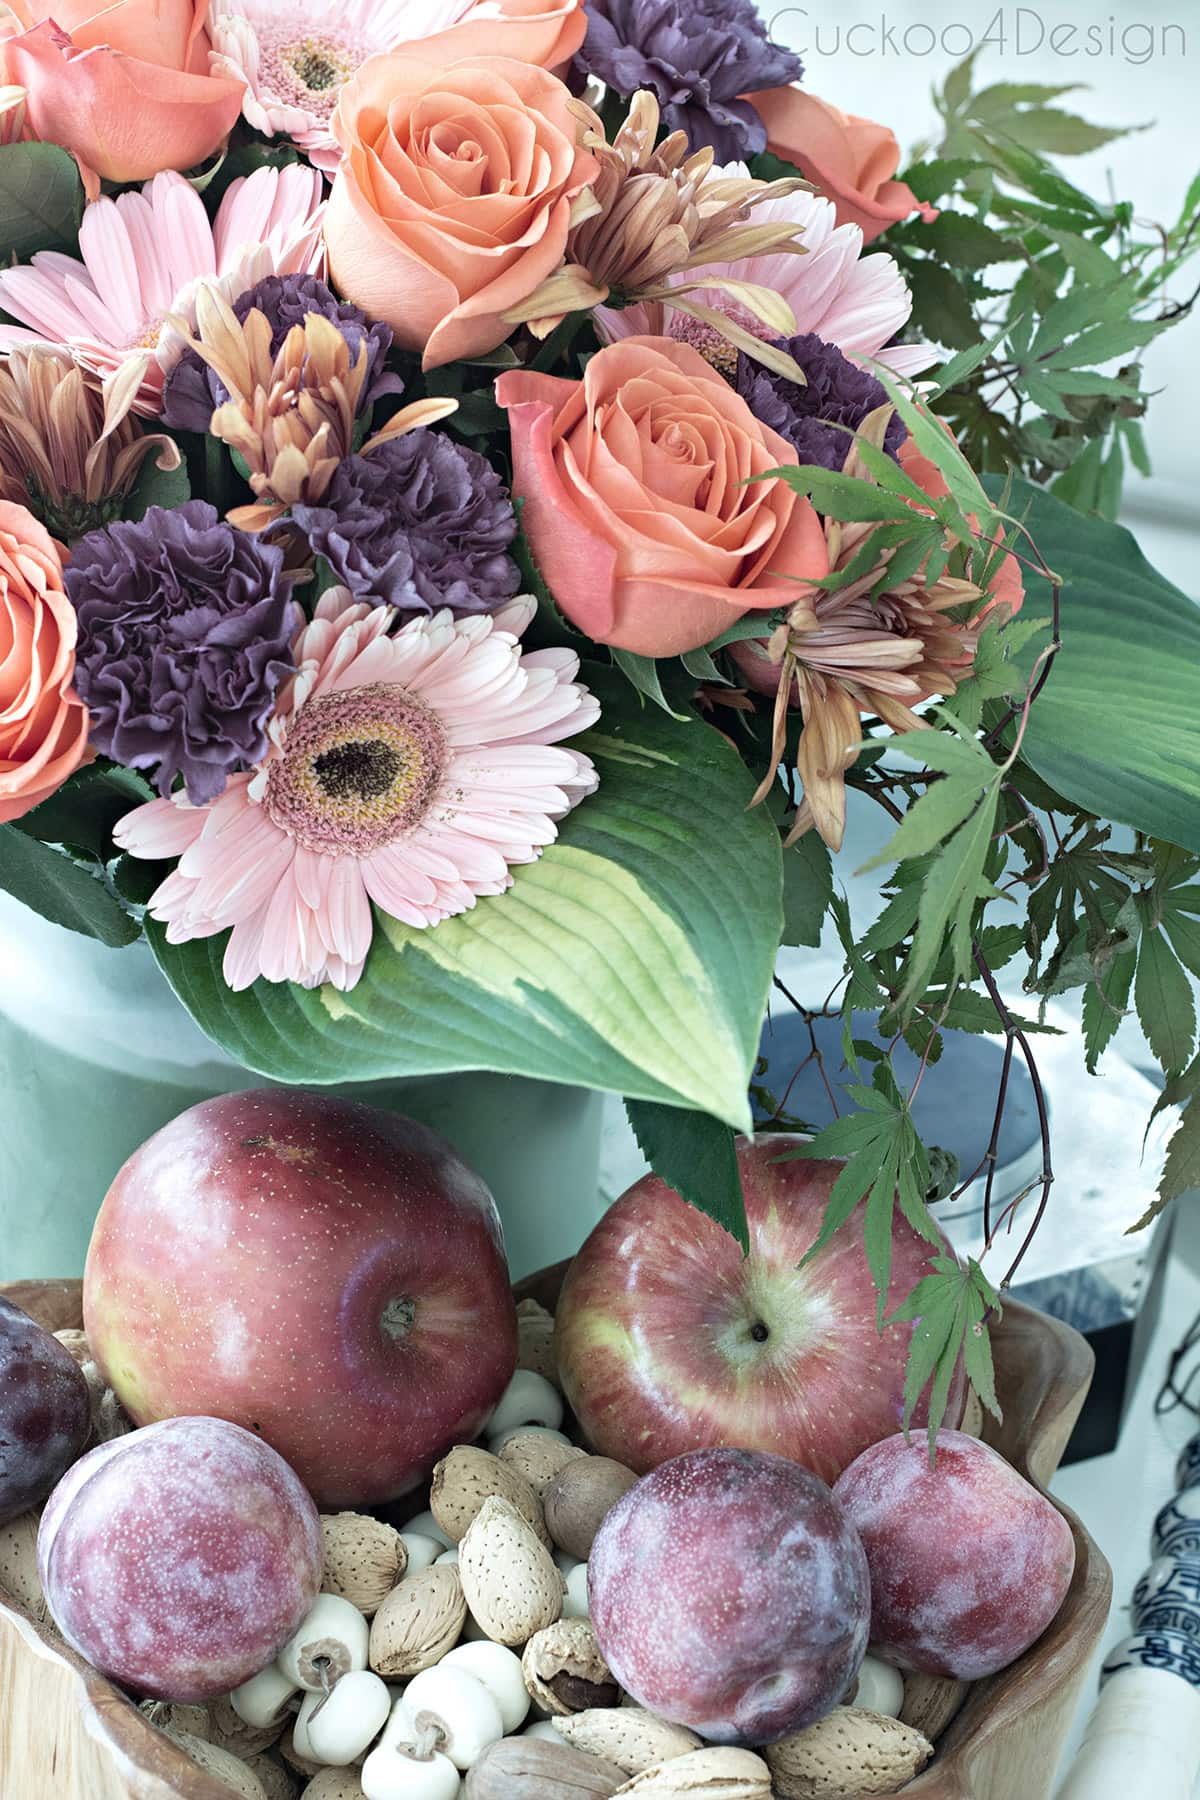 beautiful early fall flower arrangement with fall colored roses inspired by apples and plums 